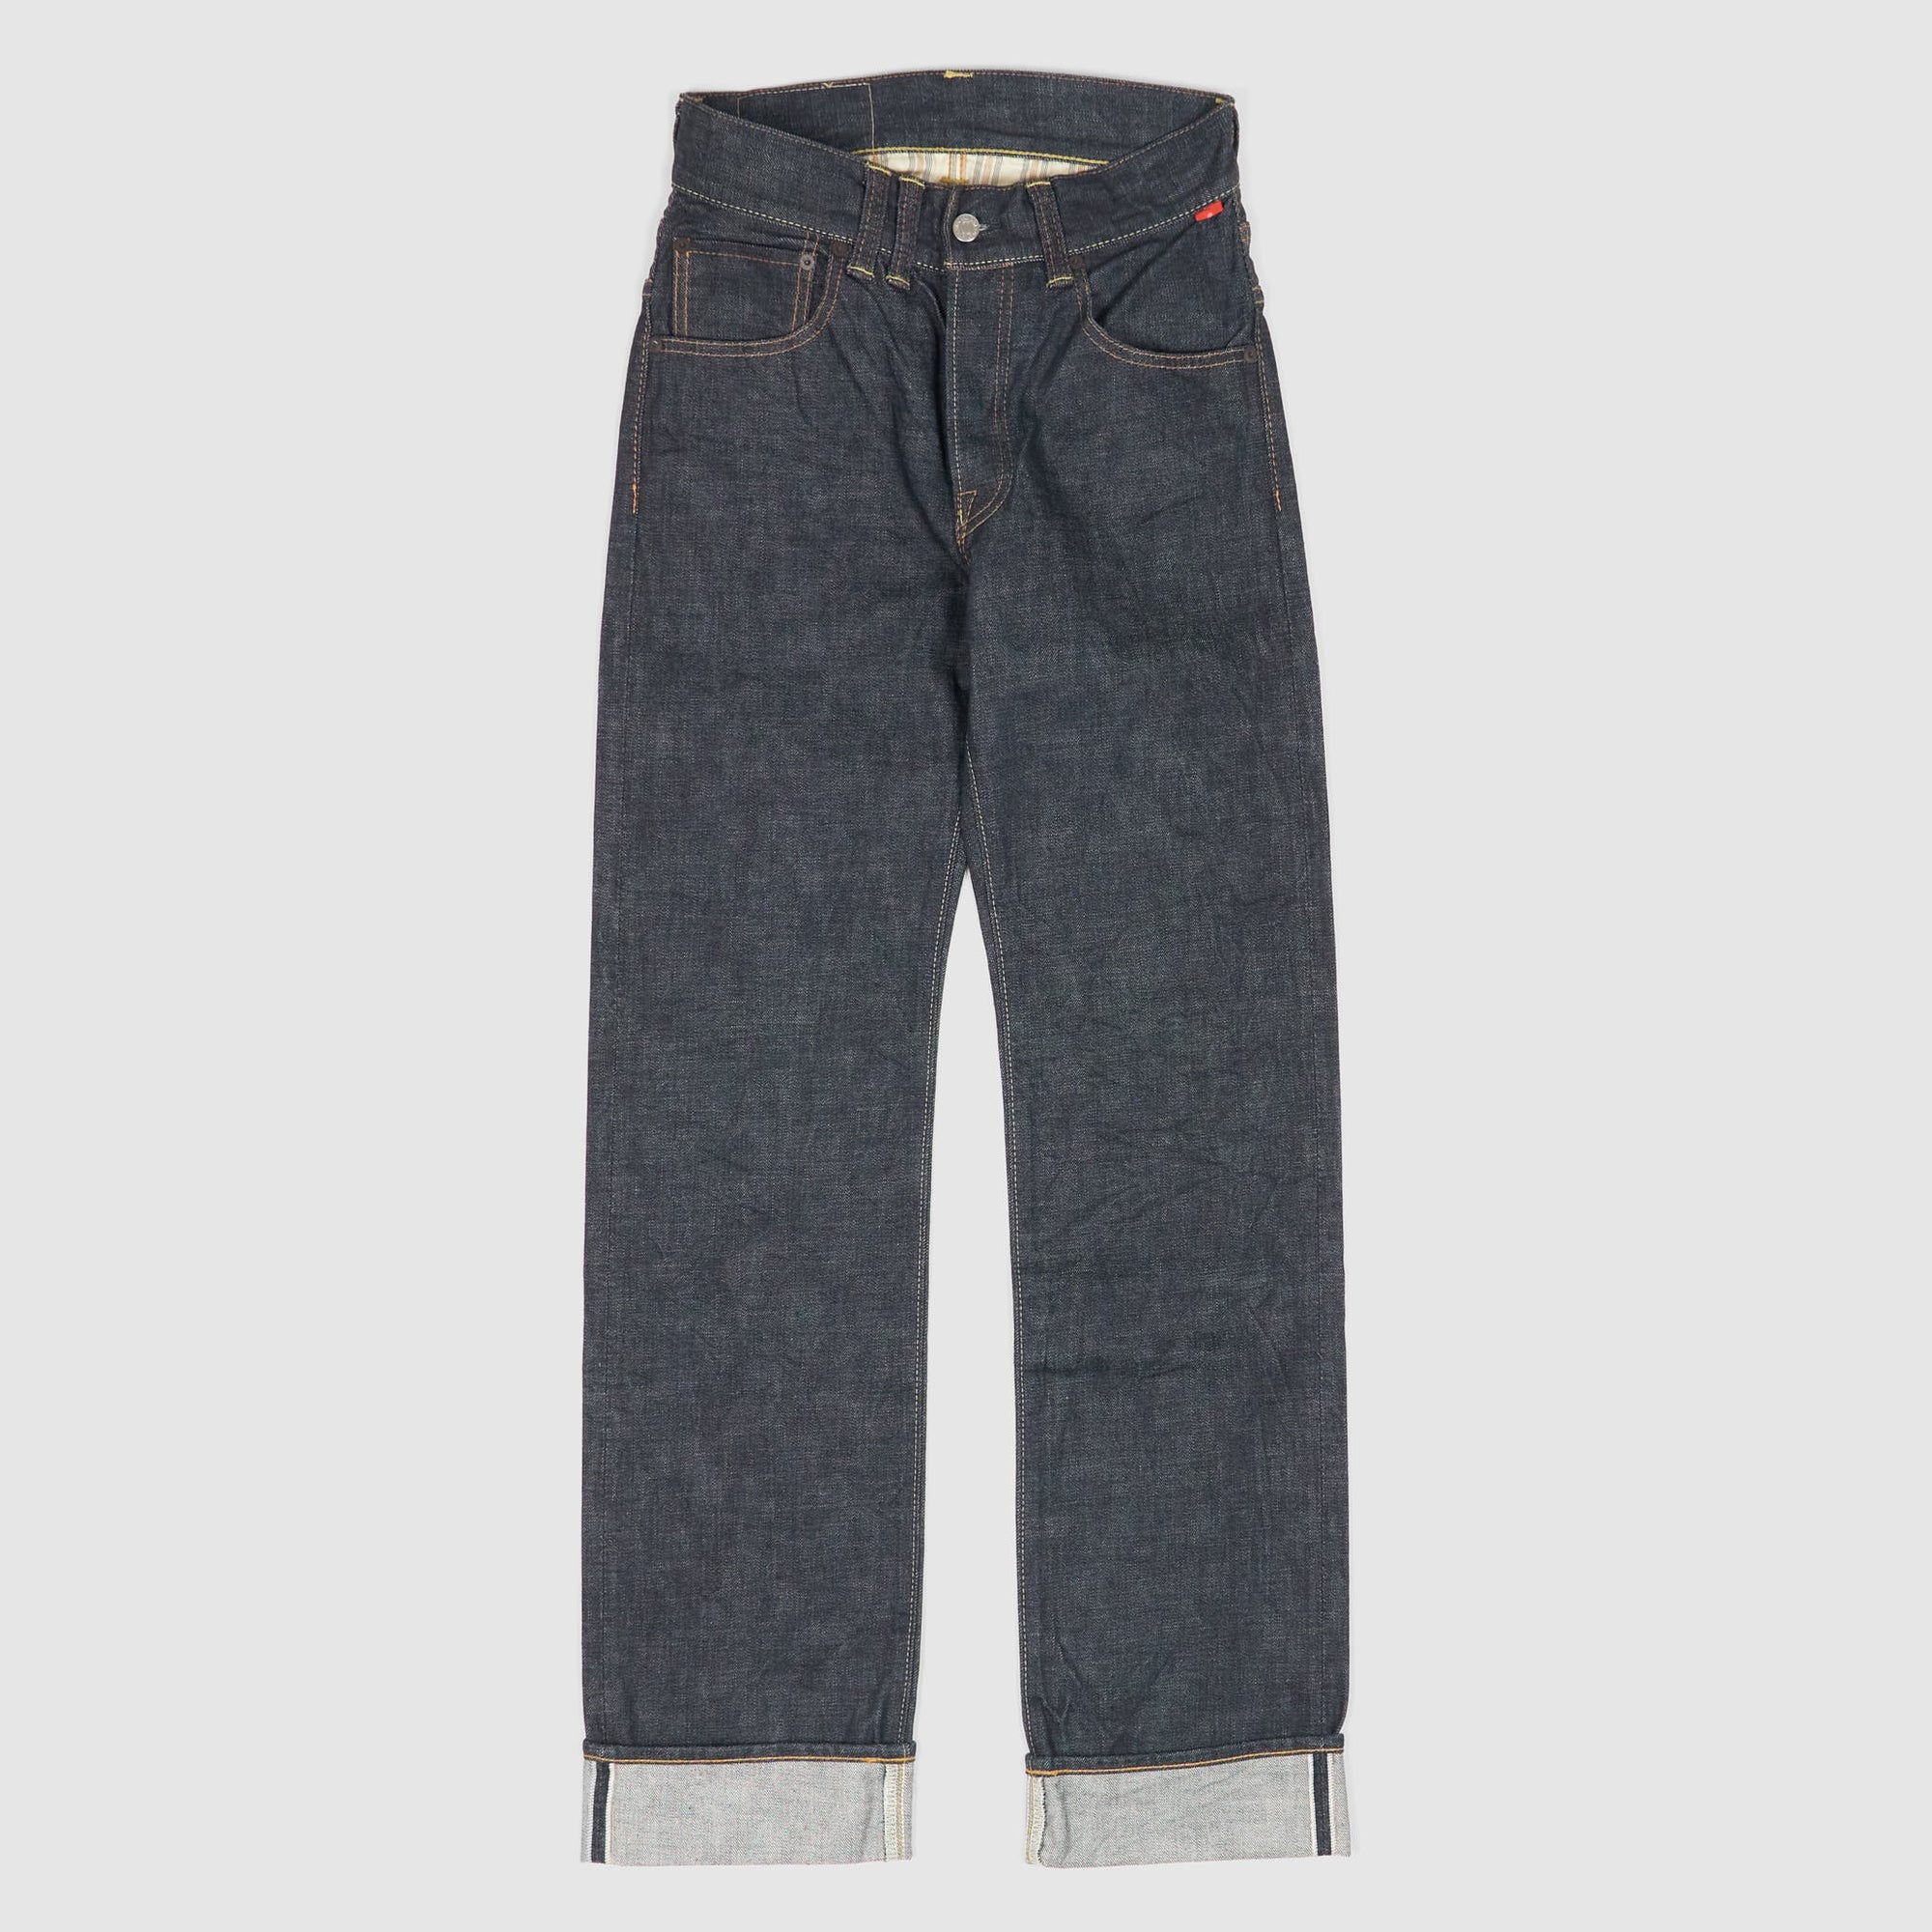 Sugar Cane WW2 Victory Star Selvage Denim Jeans - DeeCee style